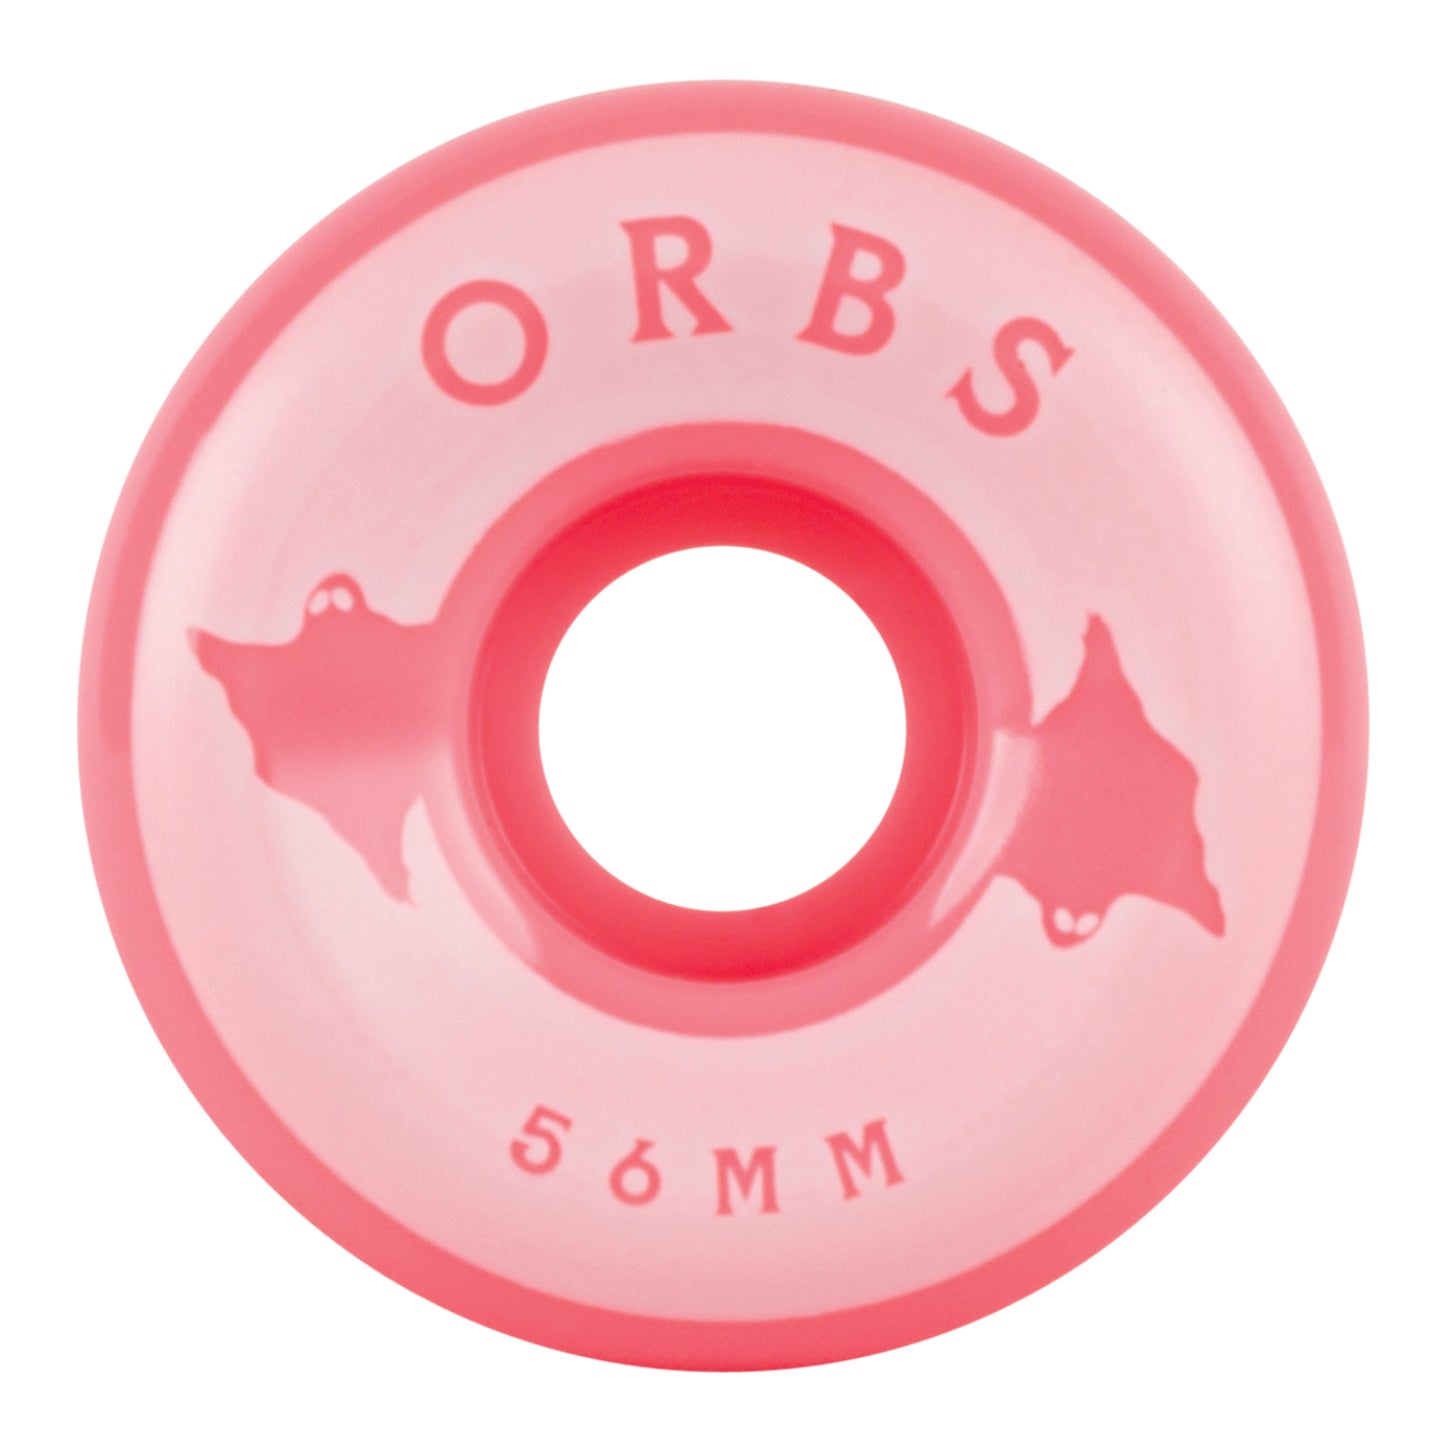 Orbs - 56mm - Specters Solids - Coral - Prime Delux Store